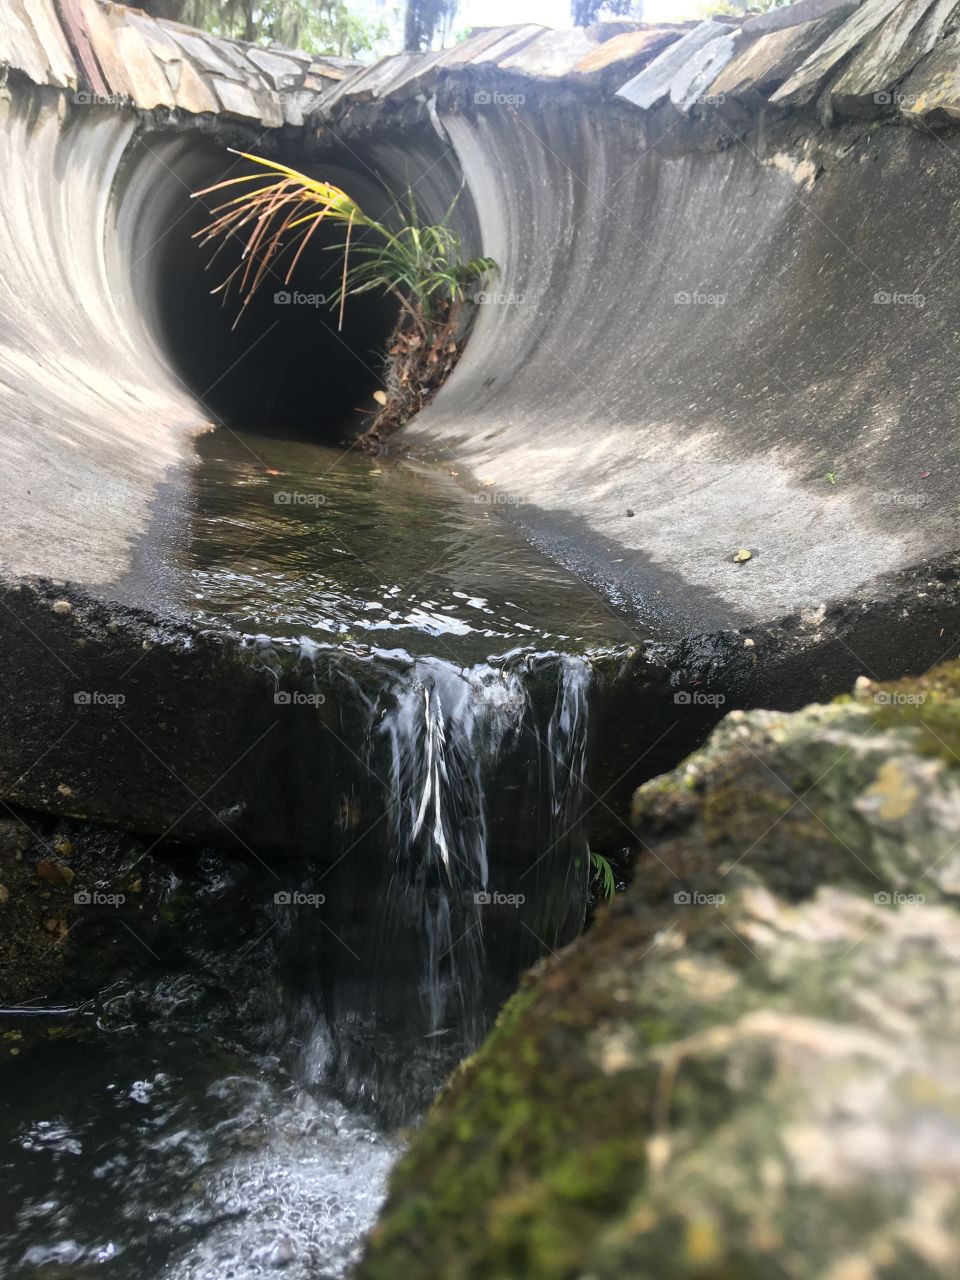 Water running through a pipe outside 